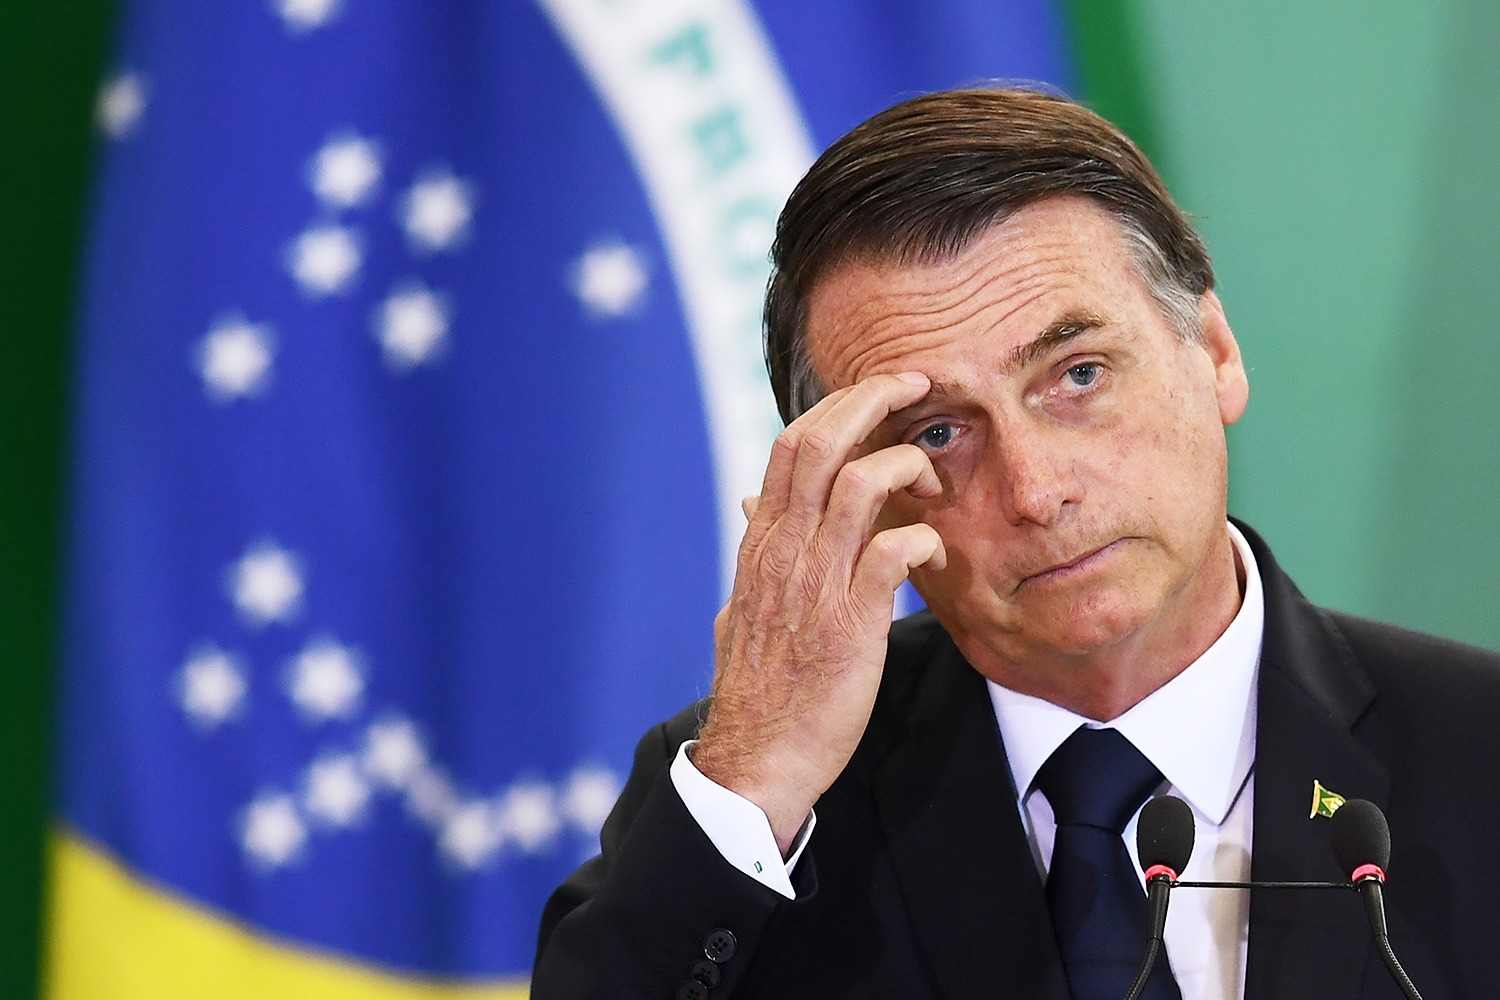 Brazilian President Jair Bolsonaro delivers a speech during the appointment ceremony of the new heads of public banks, at Planalto Palace in Brasilia on January 7, 2019. – Brazil’s Finance Minister Paulo Guedes appointed the new presidents of the country’s public banks. (Photo by EVARISTO SA / AFP)